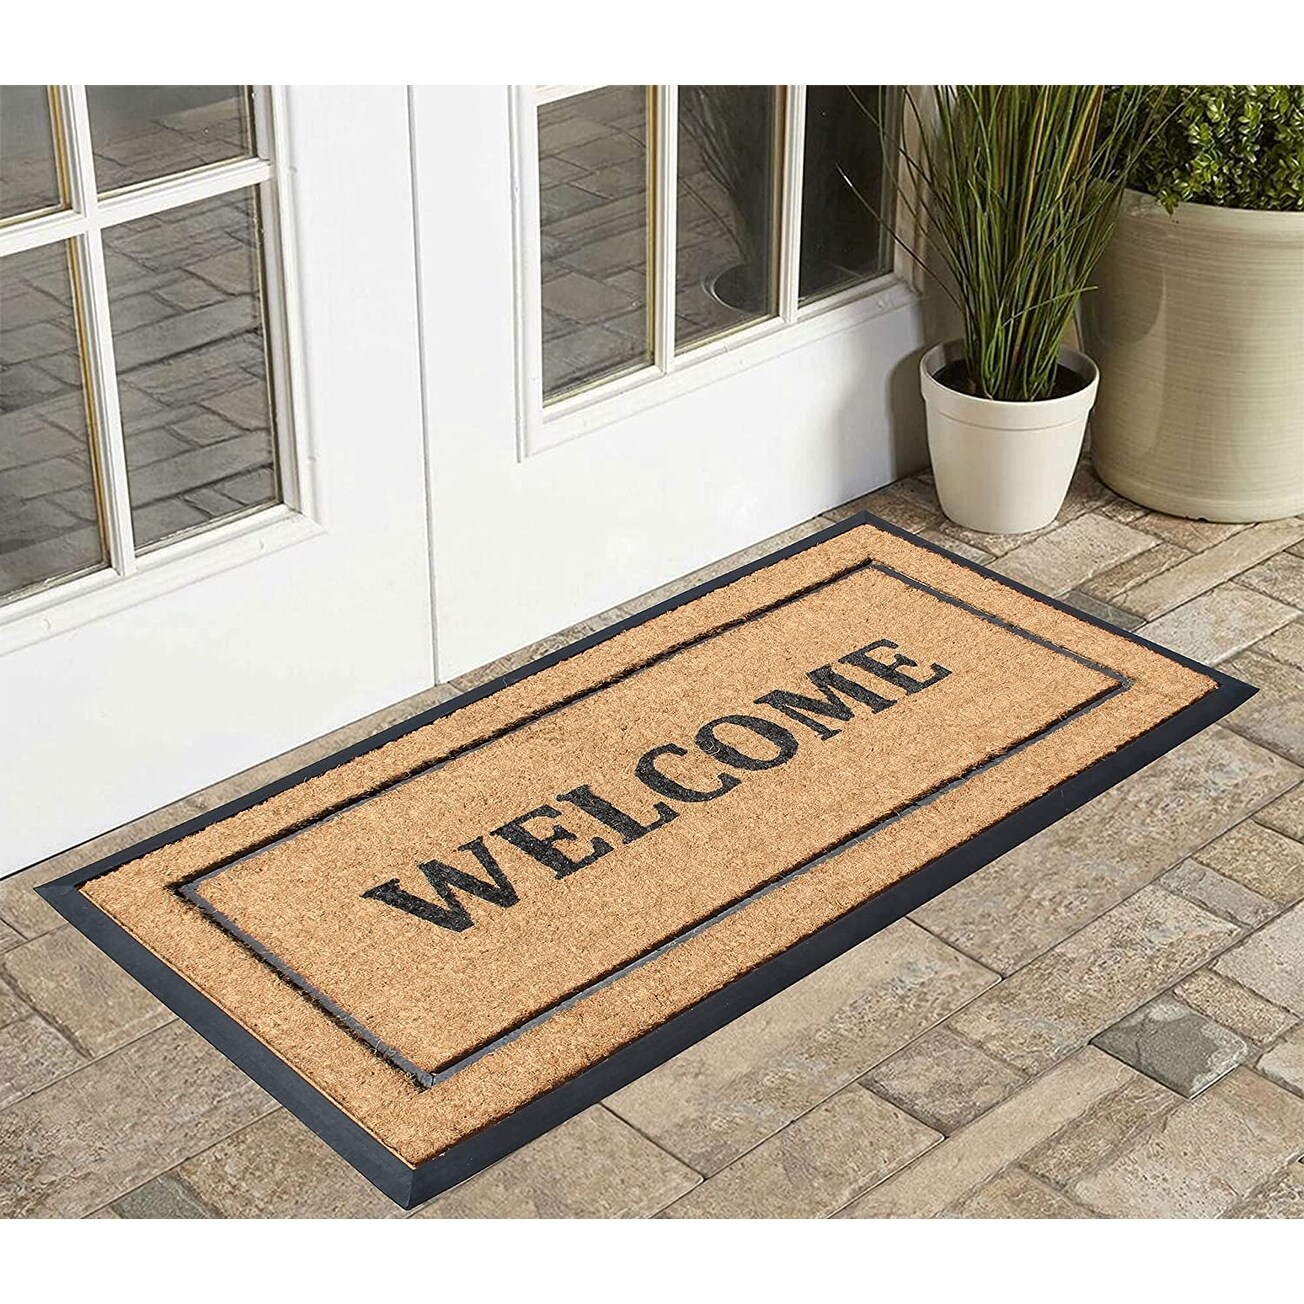 A1HC Entrance Door Mats, 24 x 48, Durable Large Outdoor Rug, Rubber  Backed Heavy Non-Slip Welcome Doormat - 24 X 48 - On Sale - Bed Bath &  Beyond - 35781726